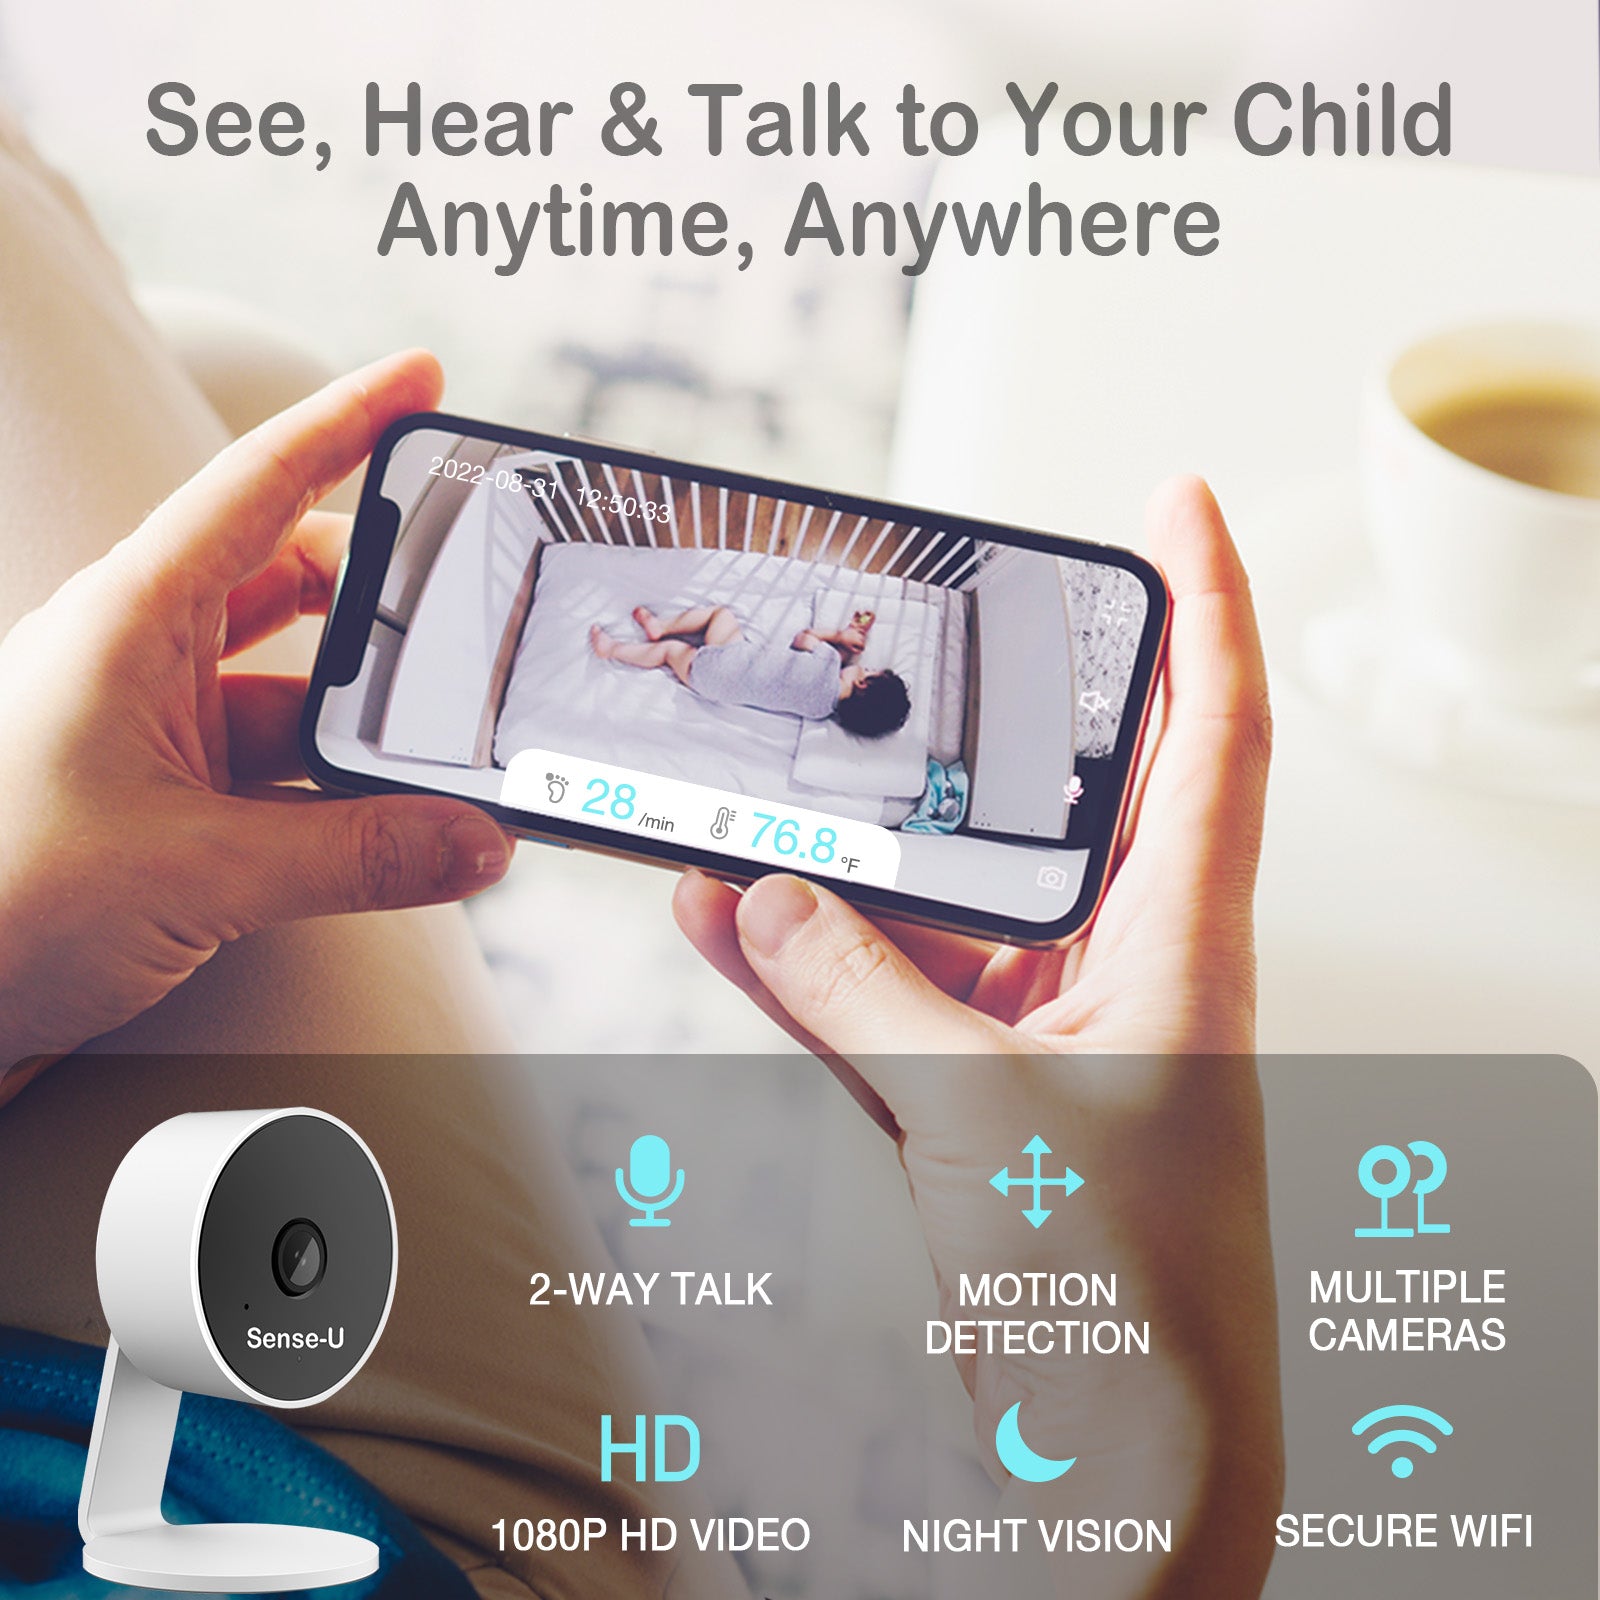 Sense-U® Complete: The most complete baby monitor system